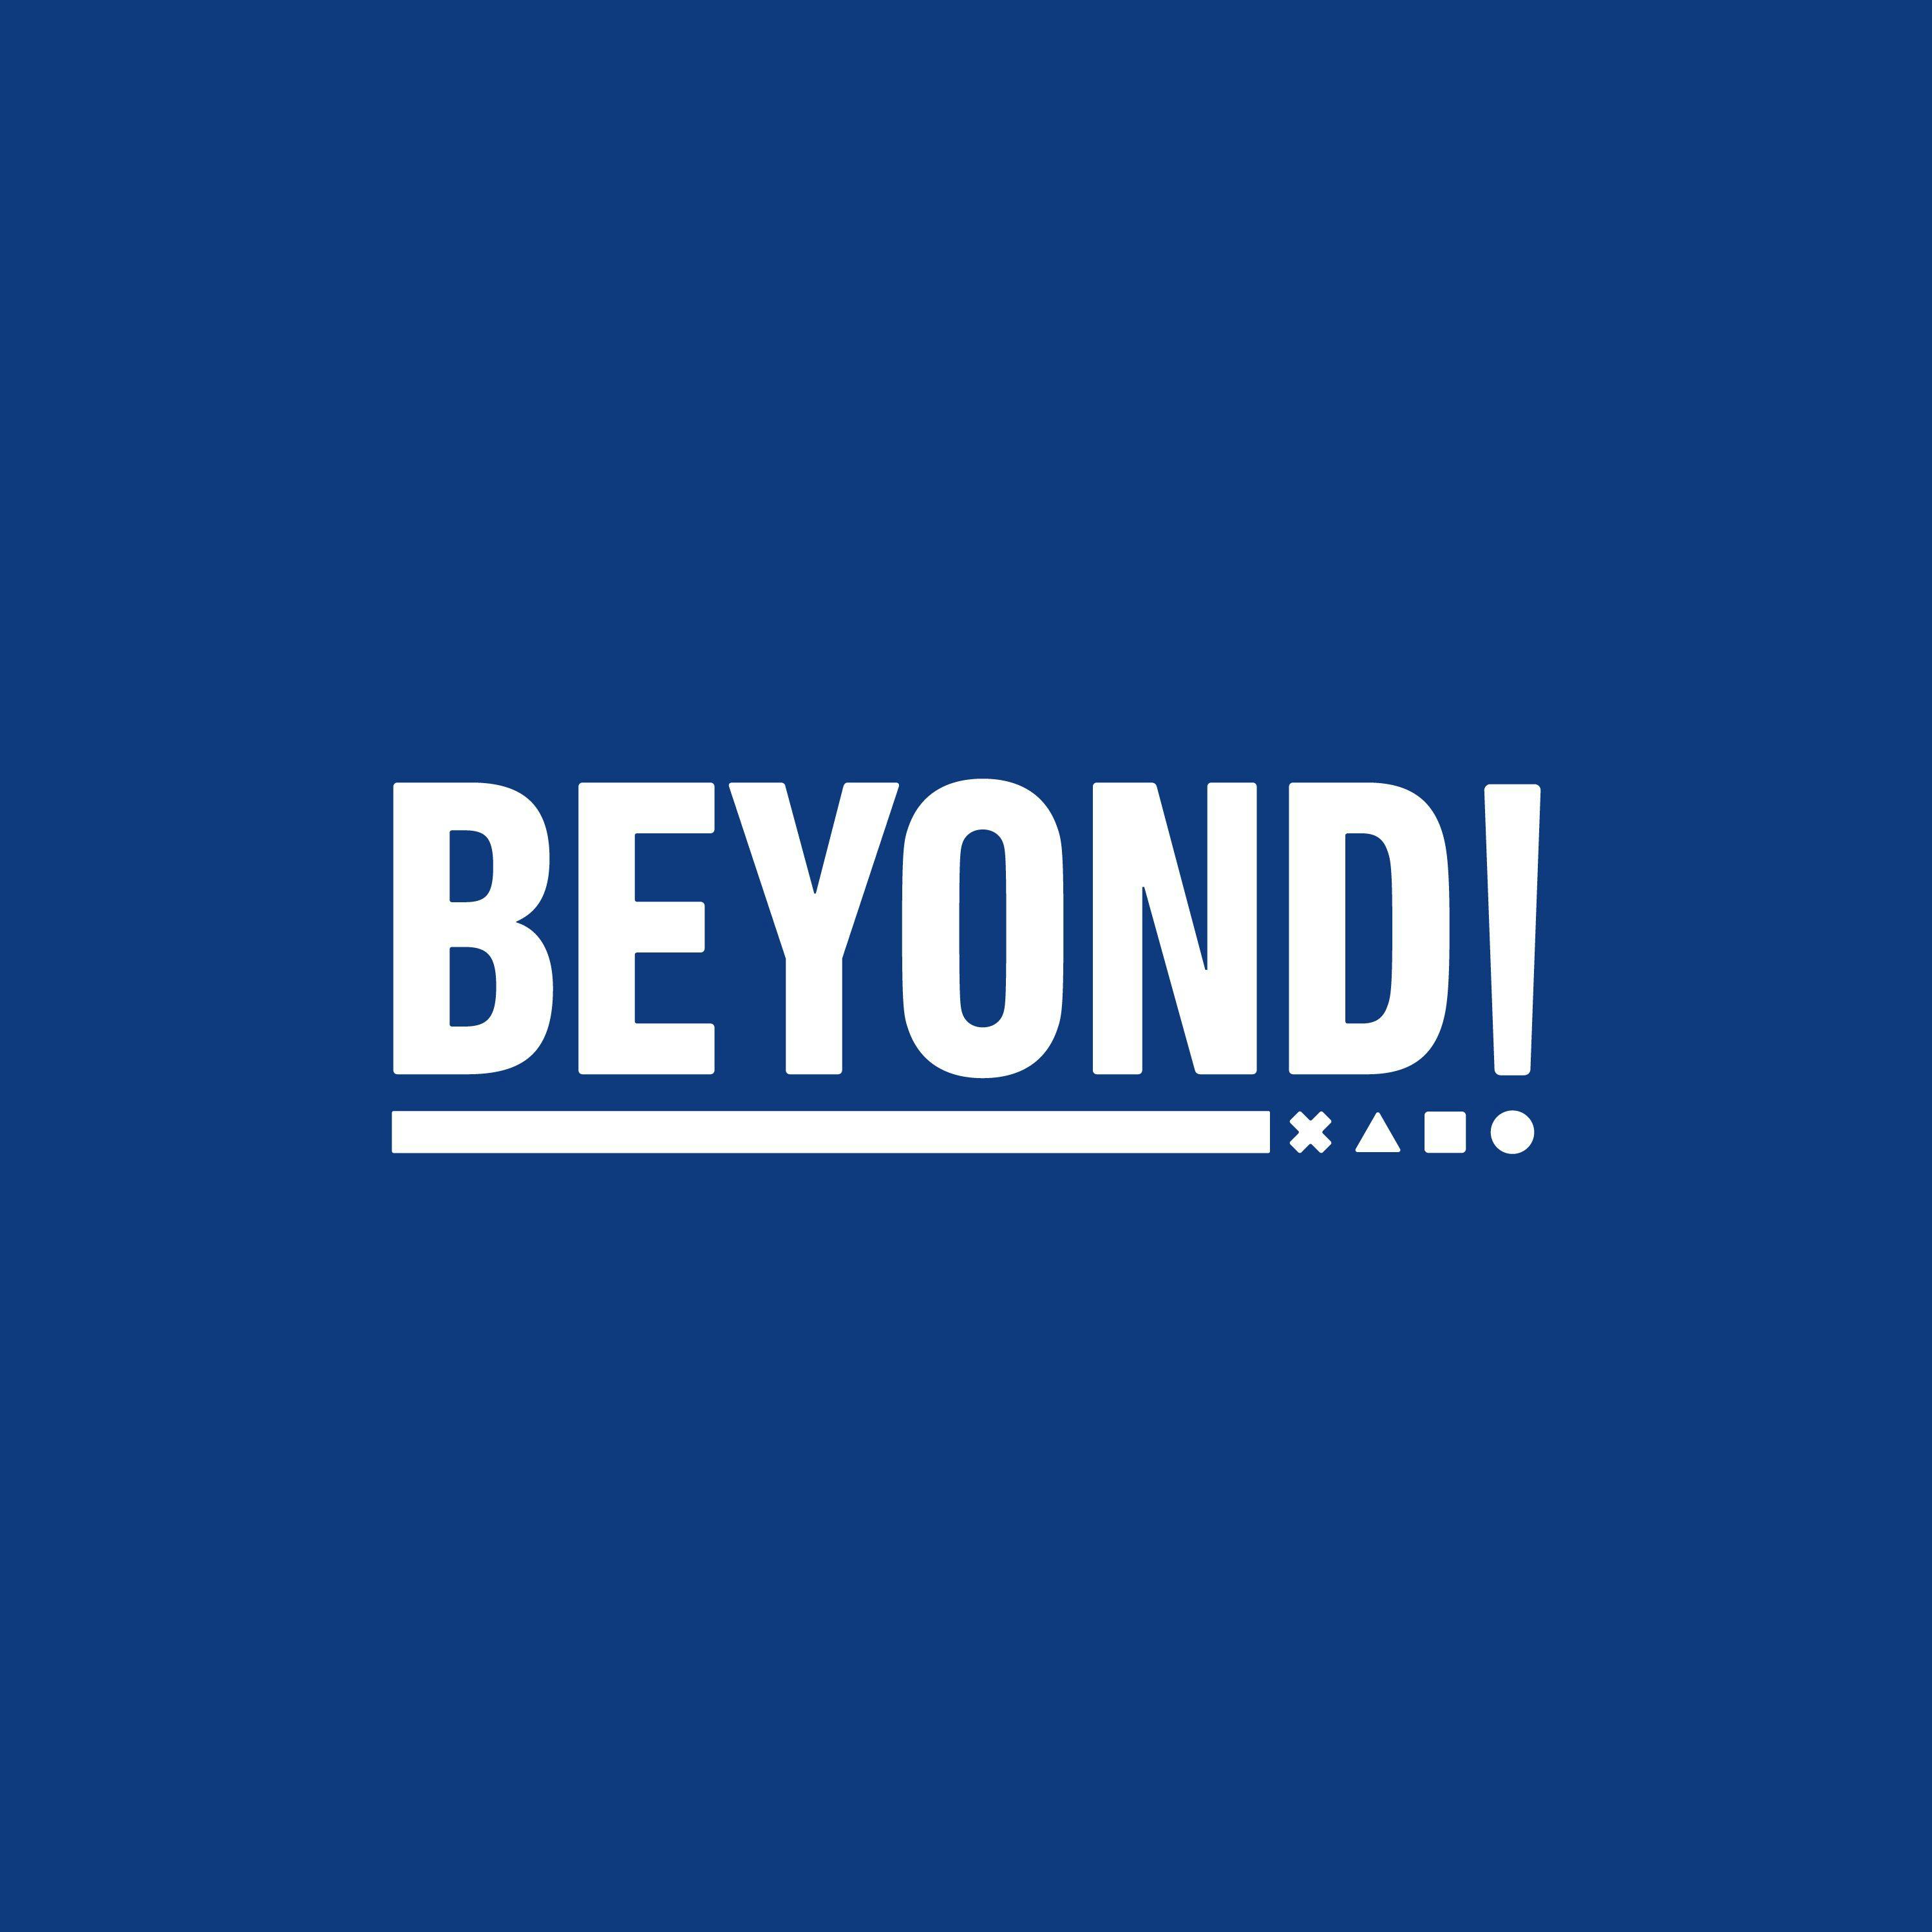 PS5's 2021 Exclusives Lineup Is Starting to Take Shape - Beyond Episode 688